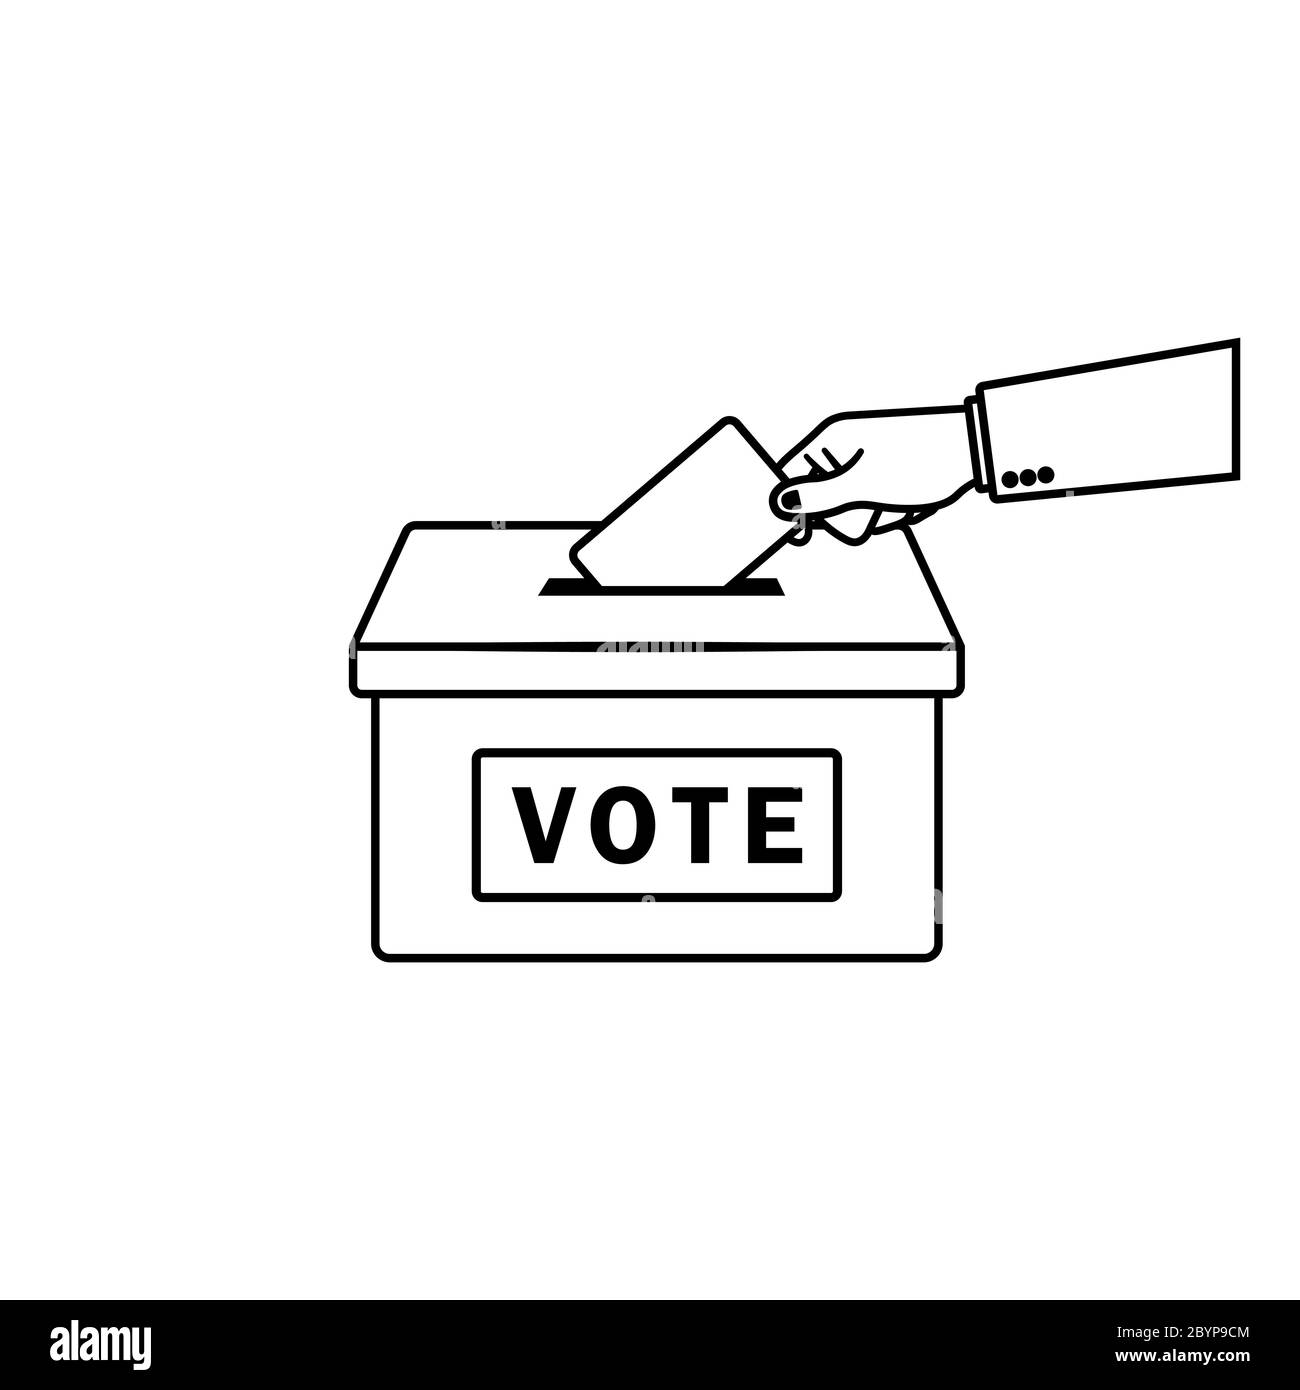 Vote. Hand putting paper in the ballot box. Voting concept in outline style on an isolated background. EPS 10 vector. Stock Vector